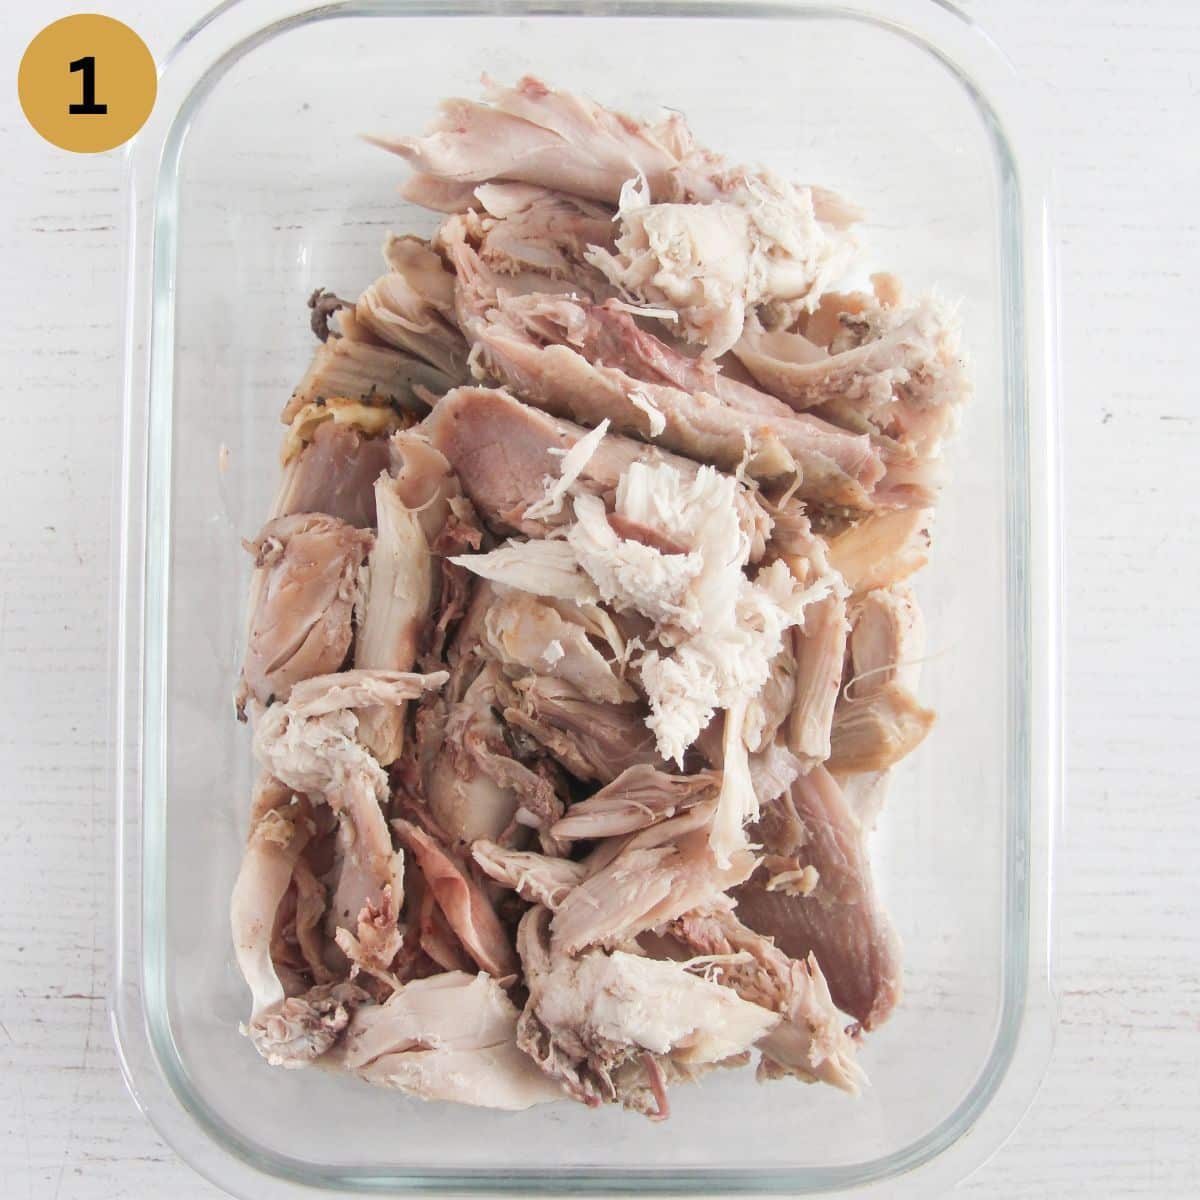 glass container holding cooked and shredded turkey meat.